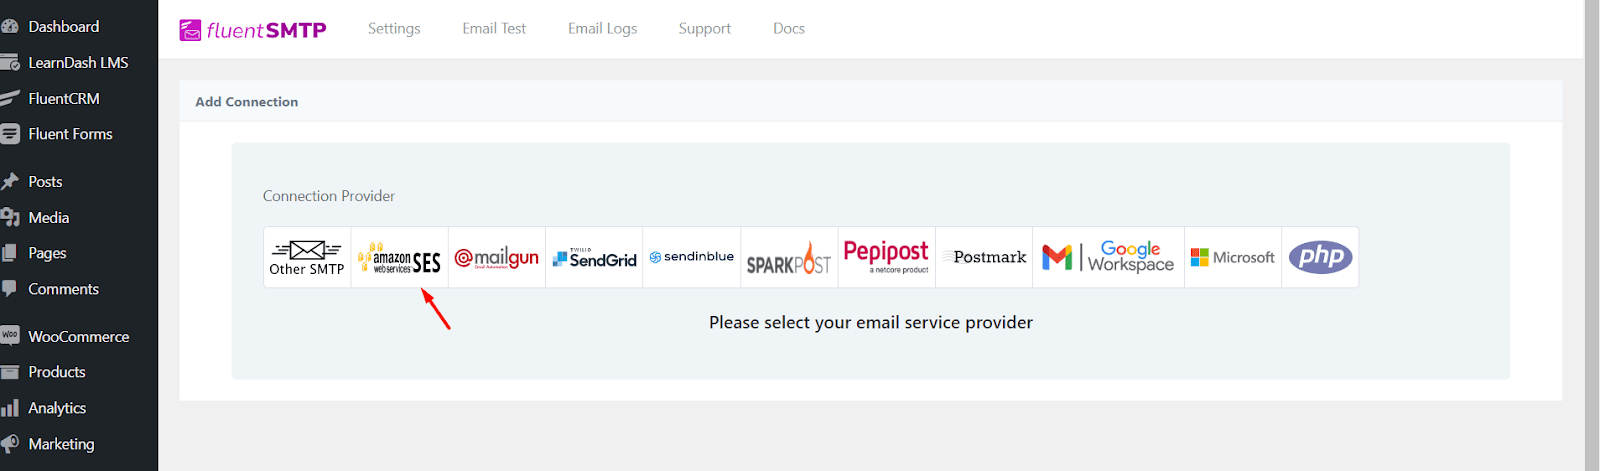 Choosing the email service provider on Fluent SMTP 